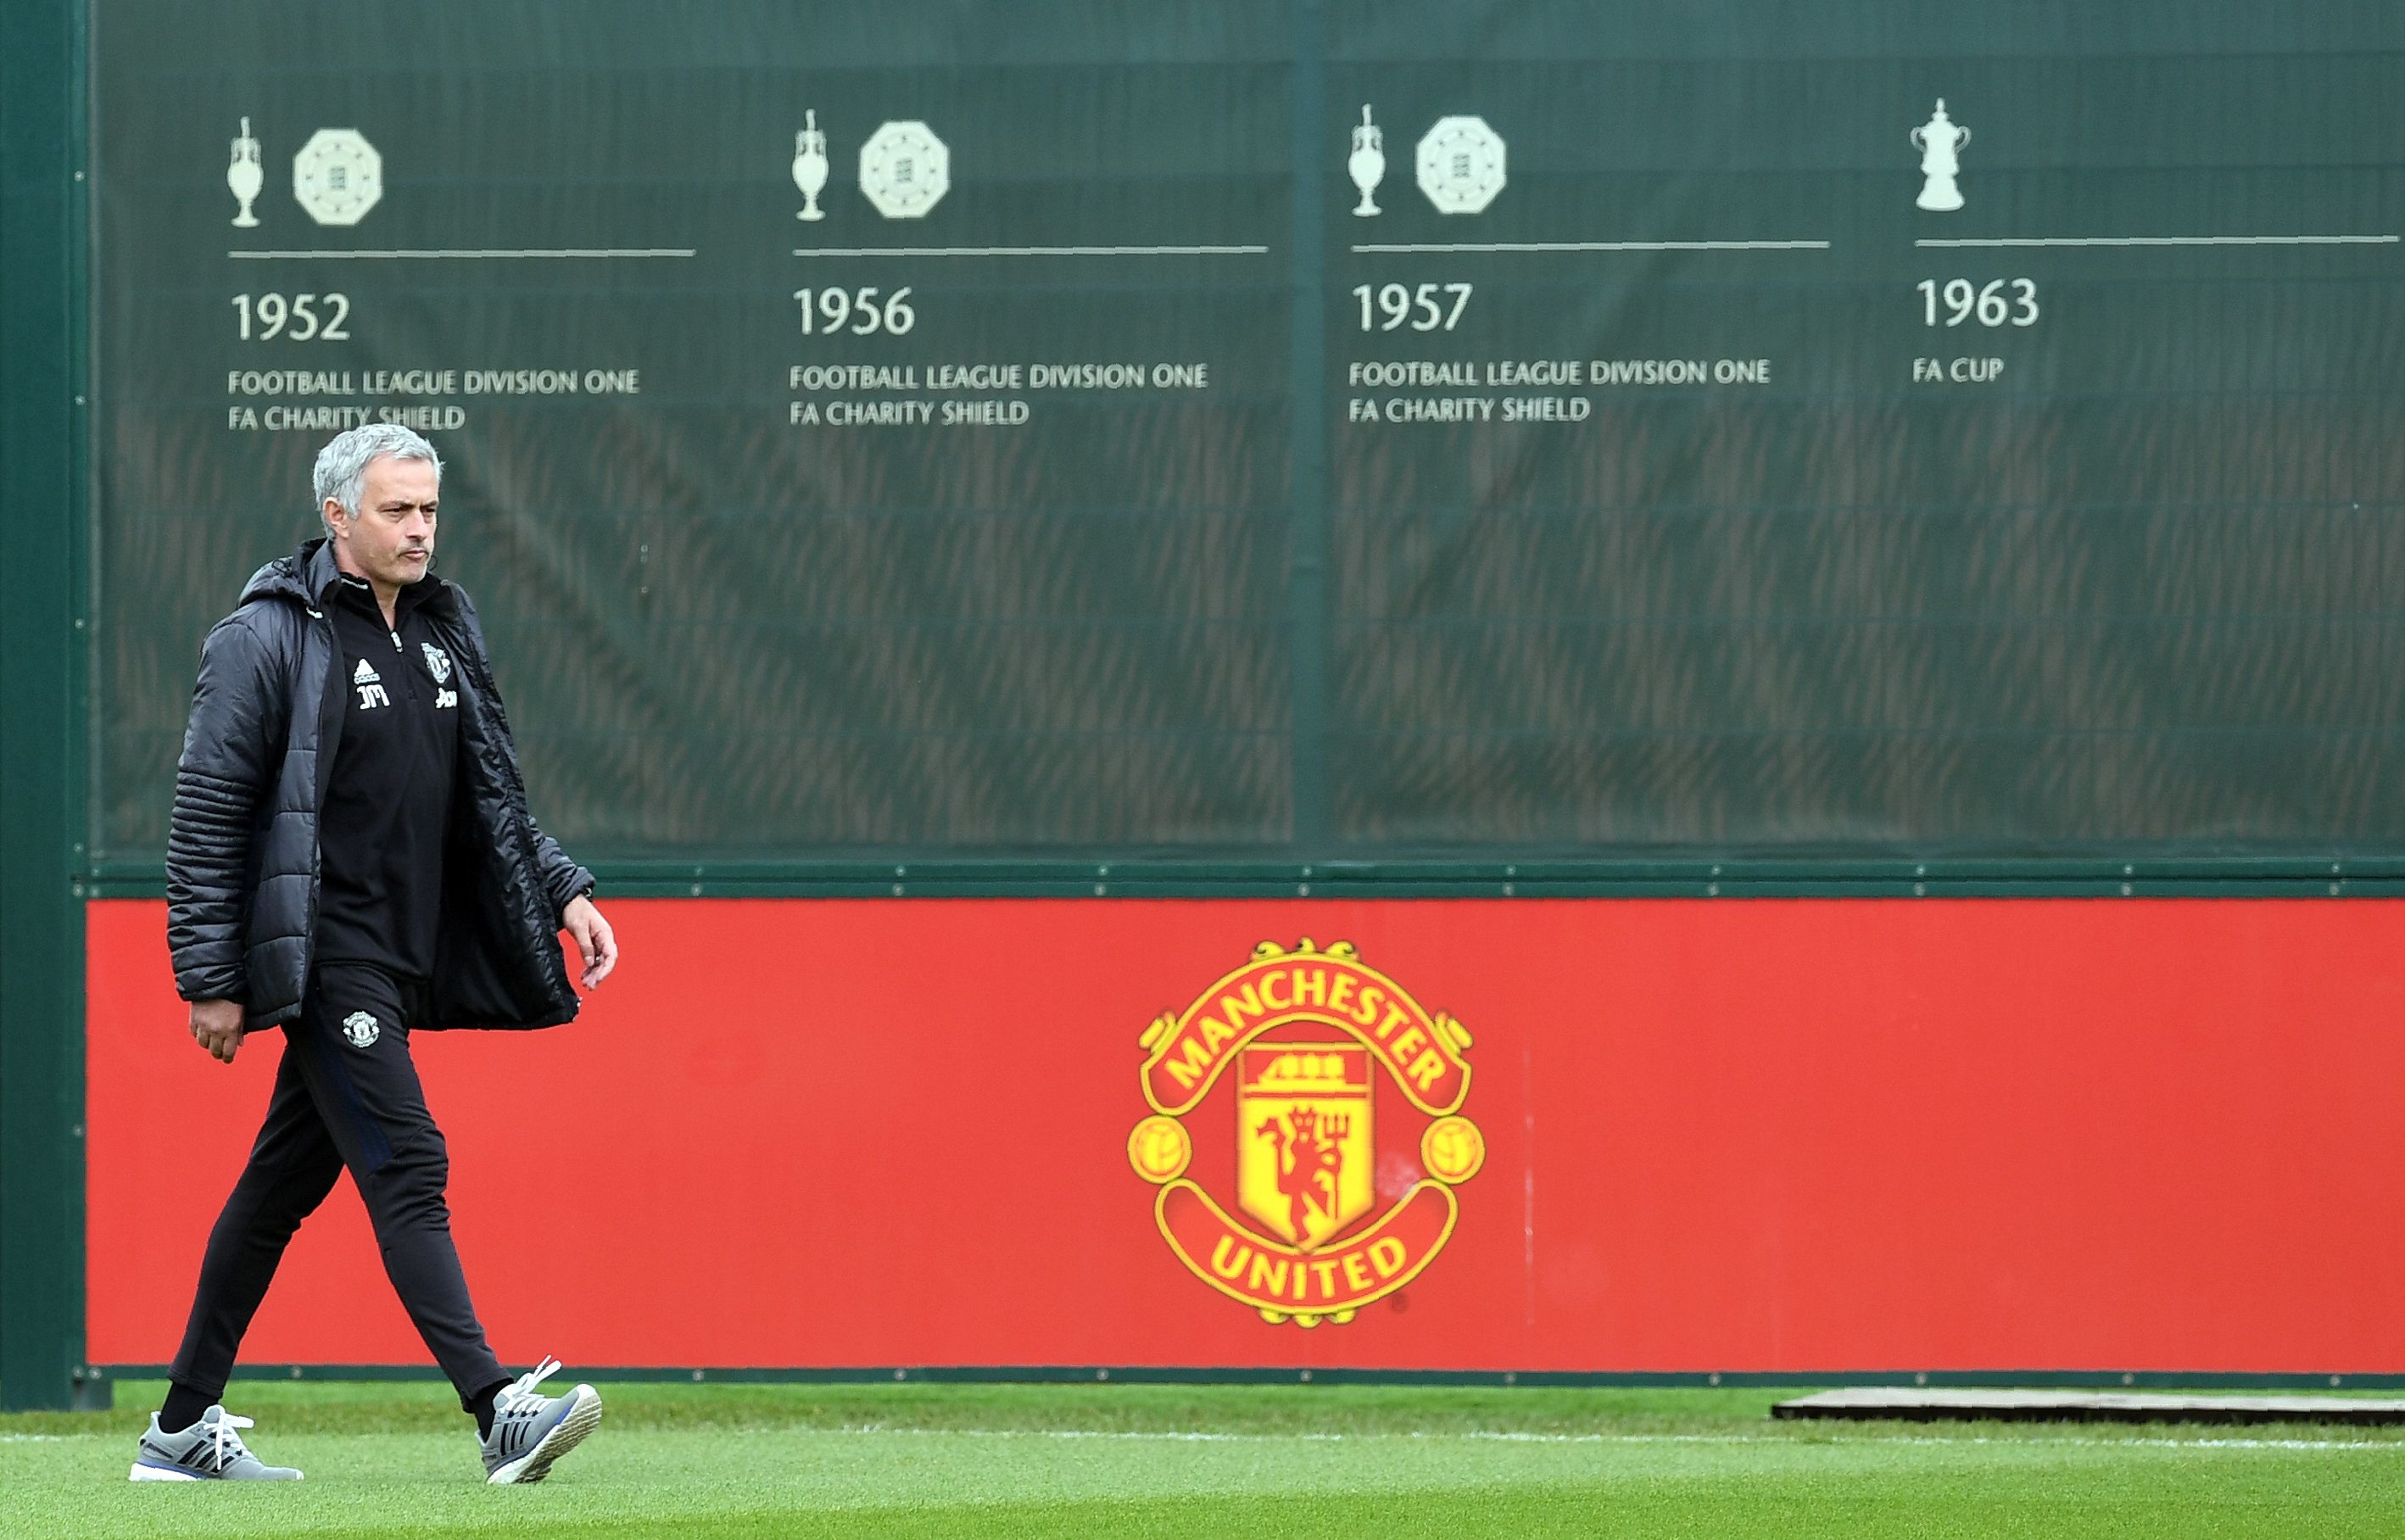 Manchester United's Portuguese manager Jose Mourinho attends a team training session as part of a media open day at the club's training complex near Carrington, west of Manchester in north west England on May 19, 2017, ahead of their UEFA Europa League final football match against Ajax. / AFP PHOTO / Paul ELLIS        (Photo credit should read PAUL ELLIS/AFP/Getty Images)